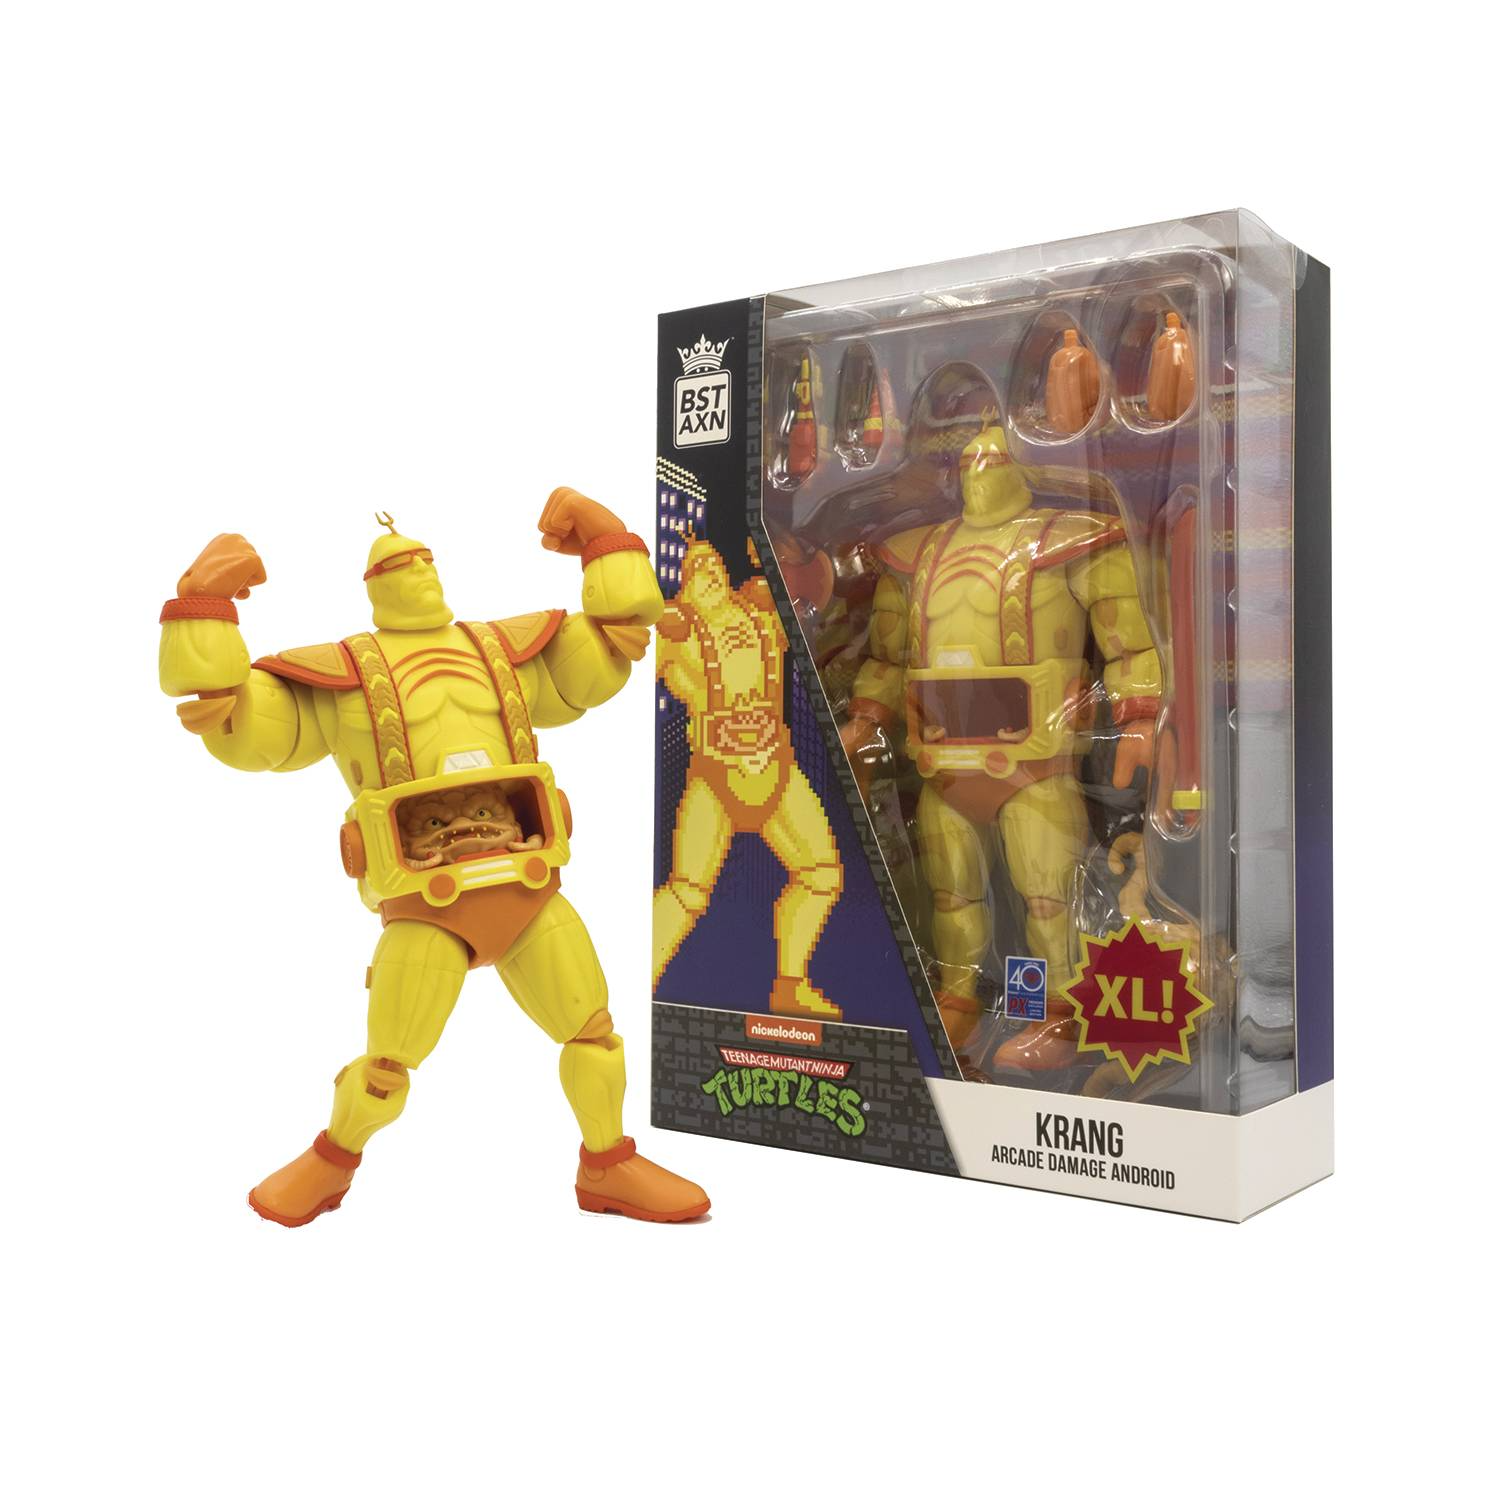 BST AXN - TMNT Animated Series - Krang XL 8Inch Action Figure